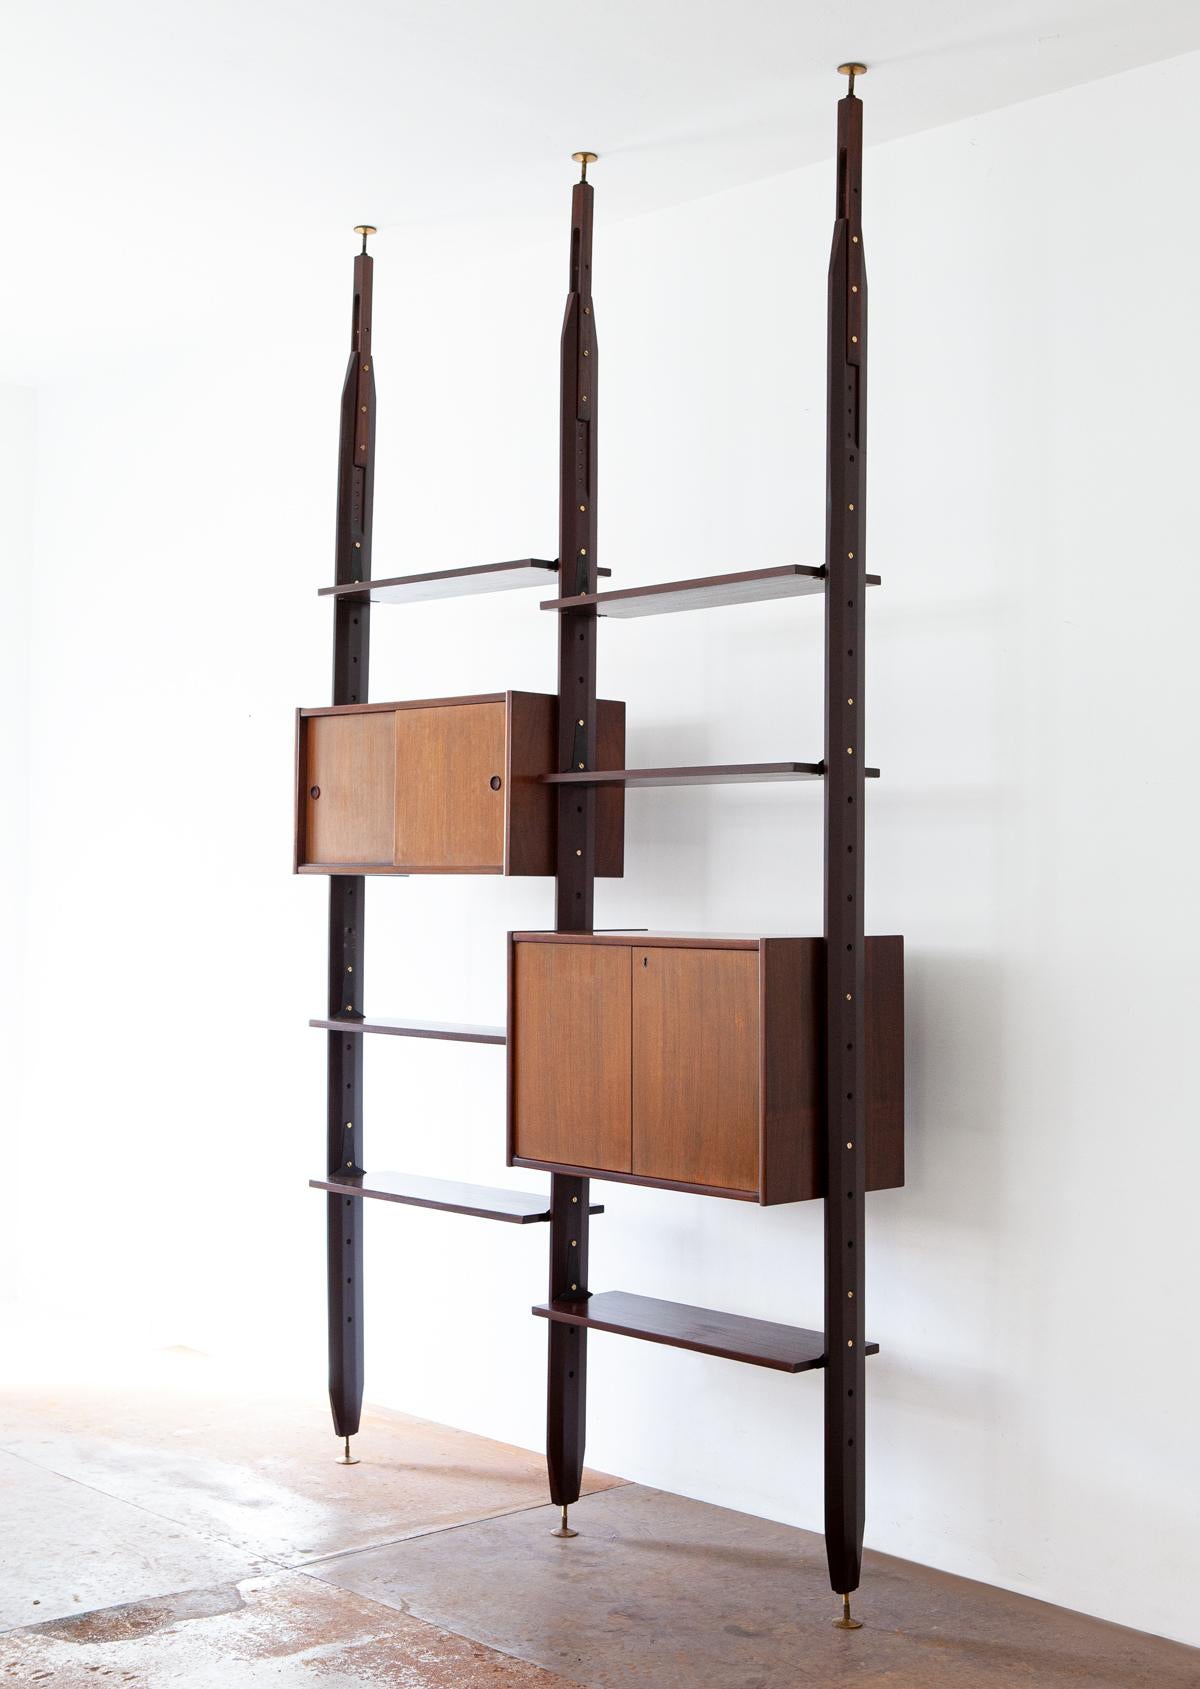 Floor to Ceiling Wall Unit, Exotic Wood, 1950s Italian Modern Design  2